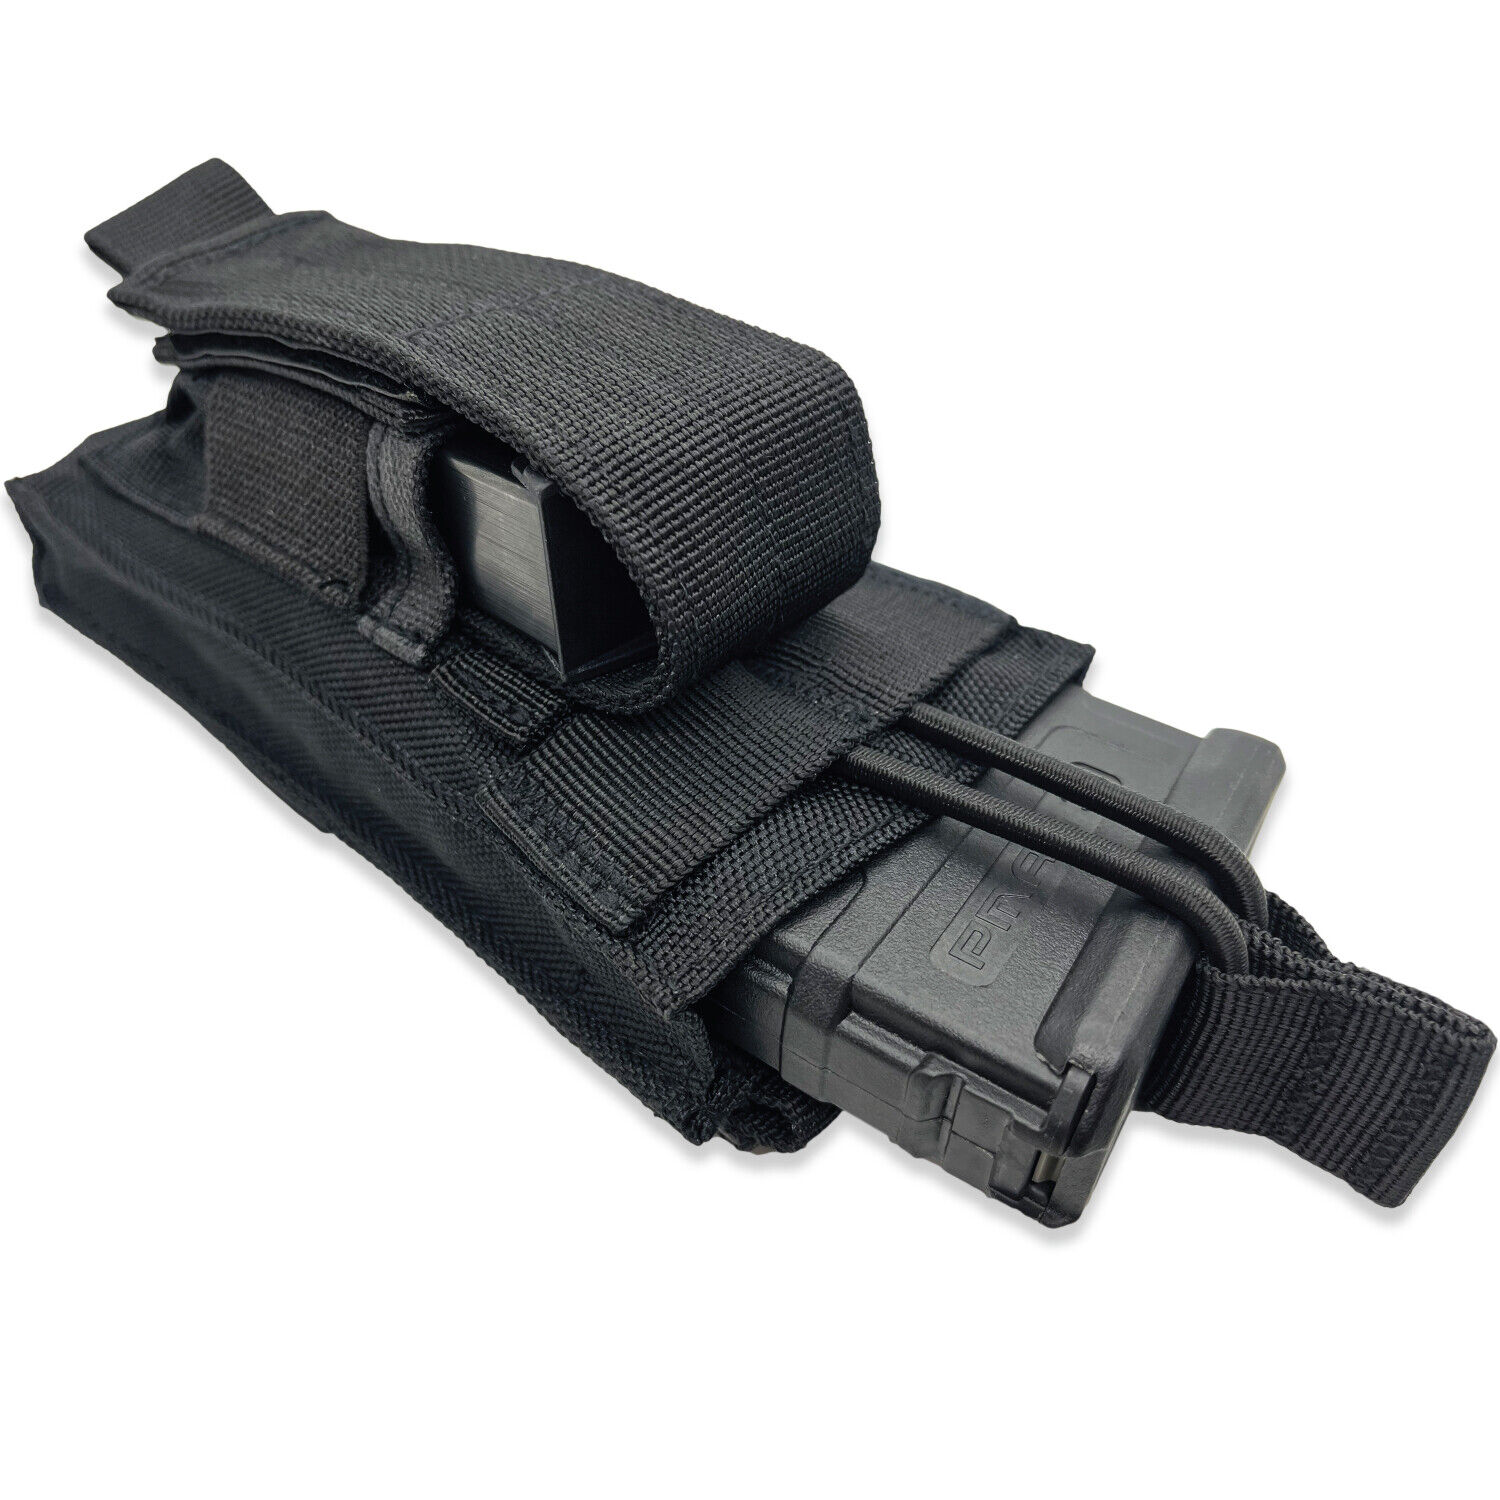 Rifle and Pistol Mag Pouch | Single Double Triple Magazine Holster for Ammo